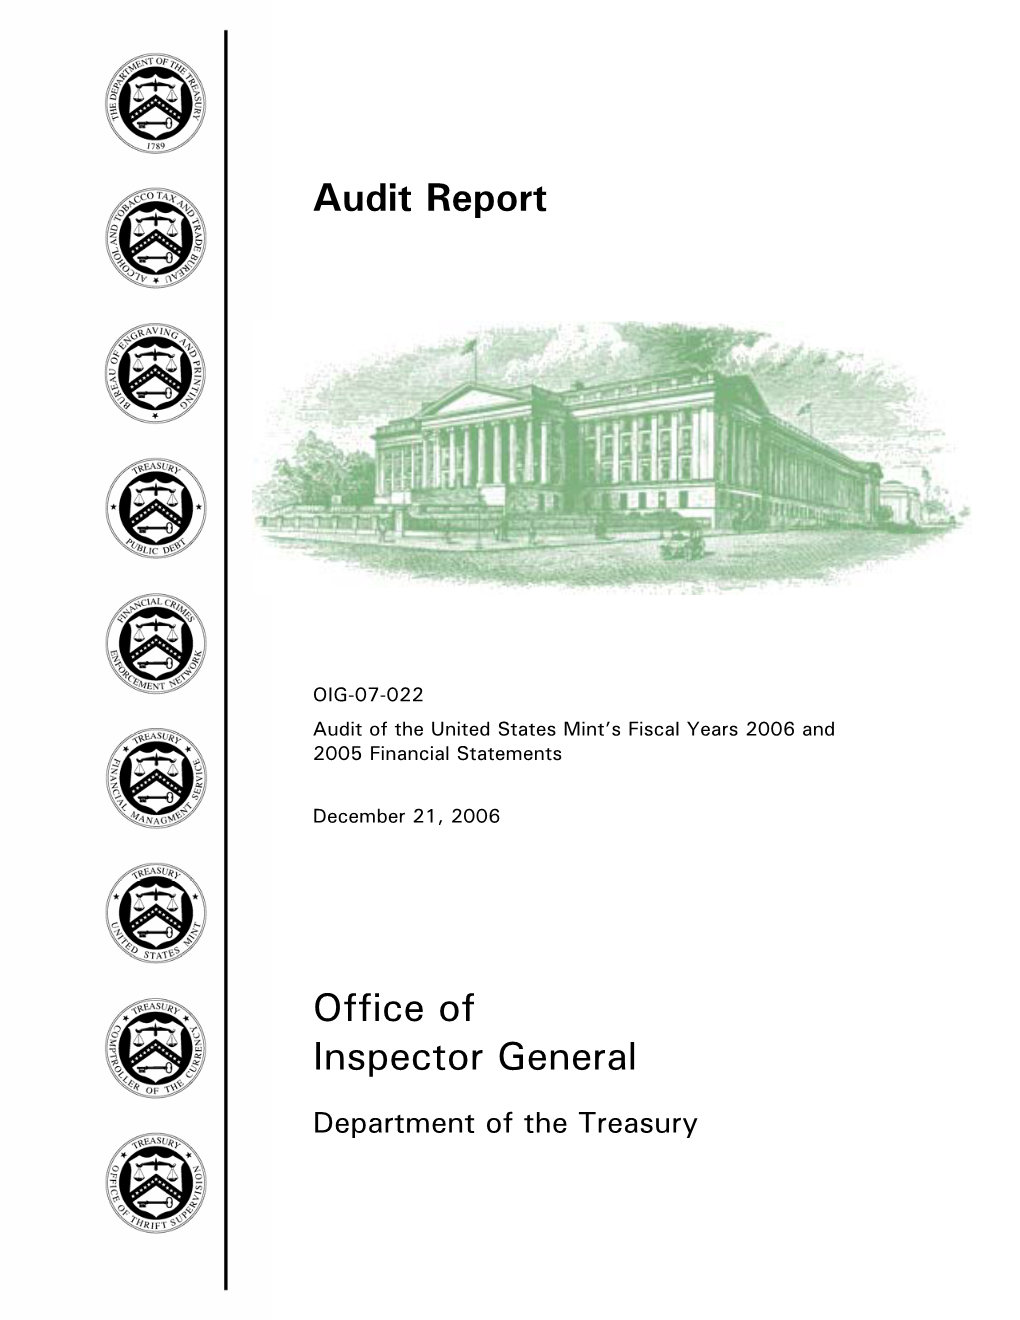 OIG-07-022 Audit of the United States Mint's Fiscal Years